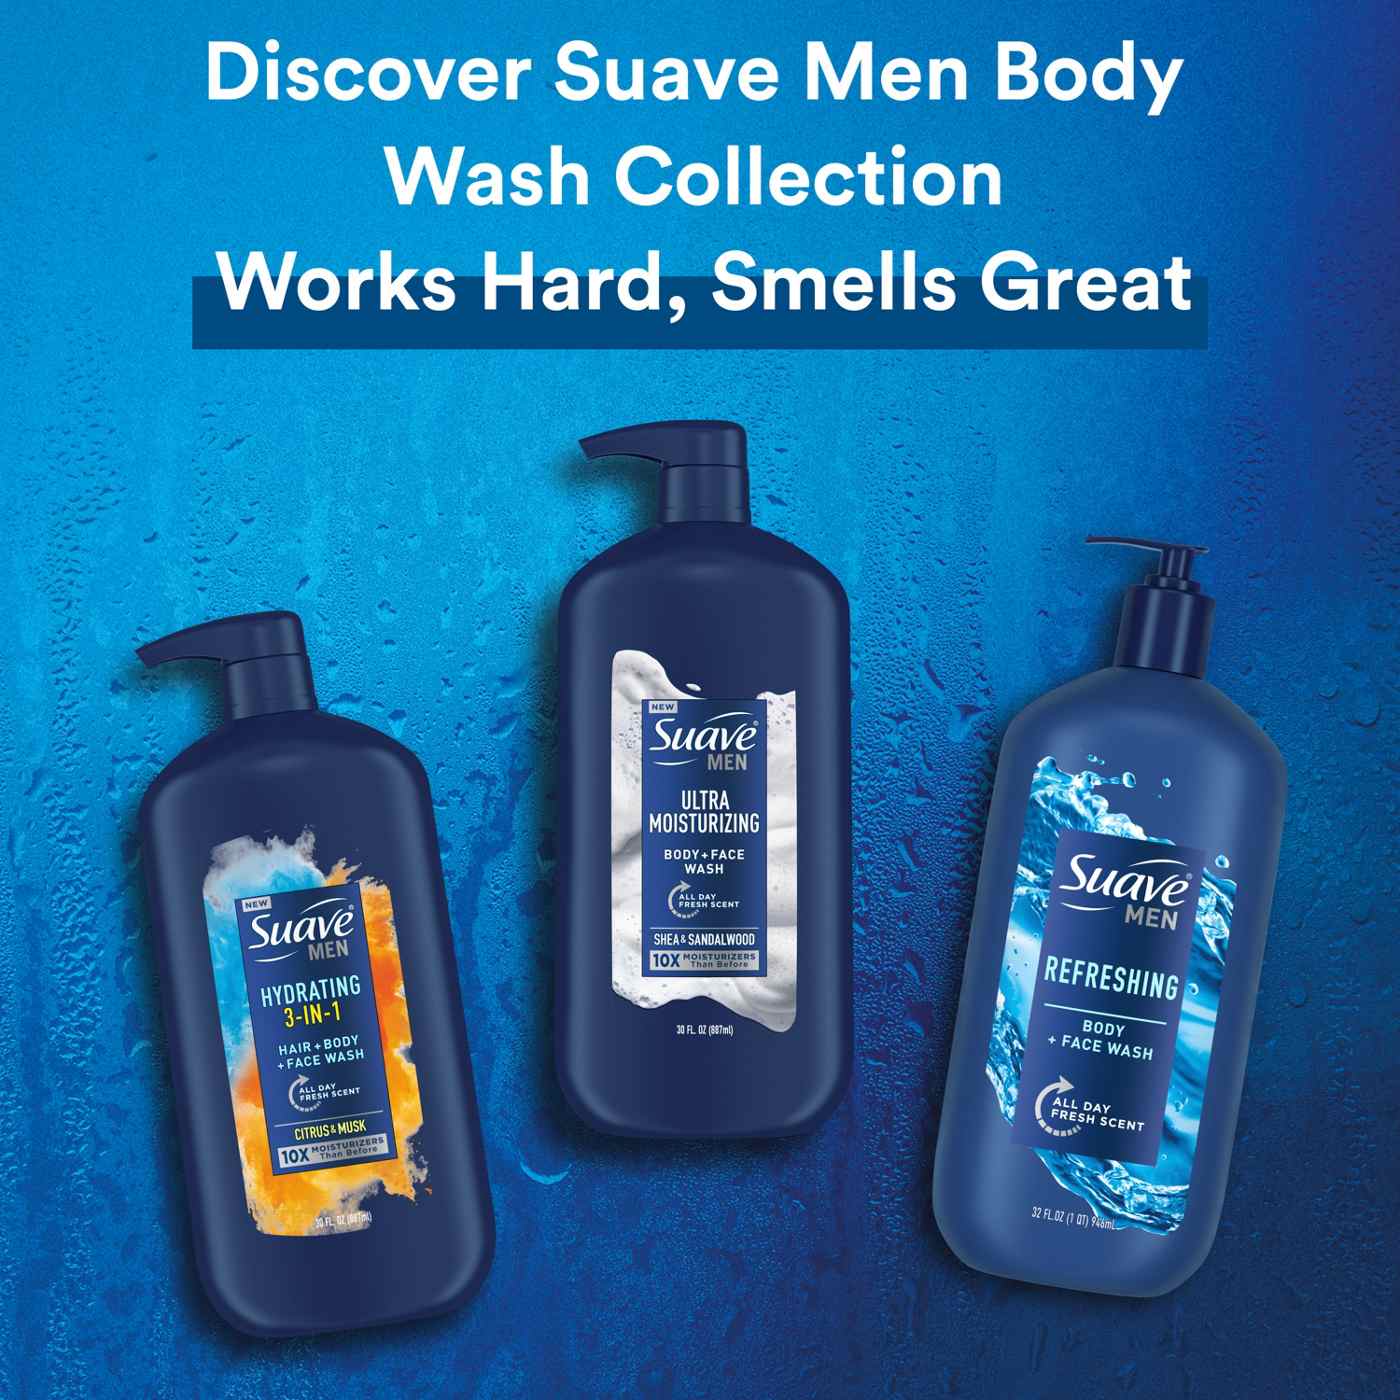 Suave Men 3 in 1 Mens Body Wash, Hair, Face and Body Wash - Cirtus & Musk; image 5 of 9